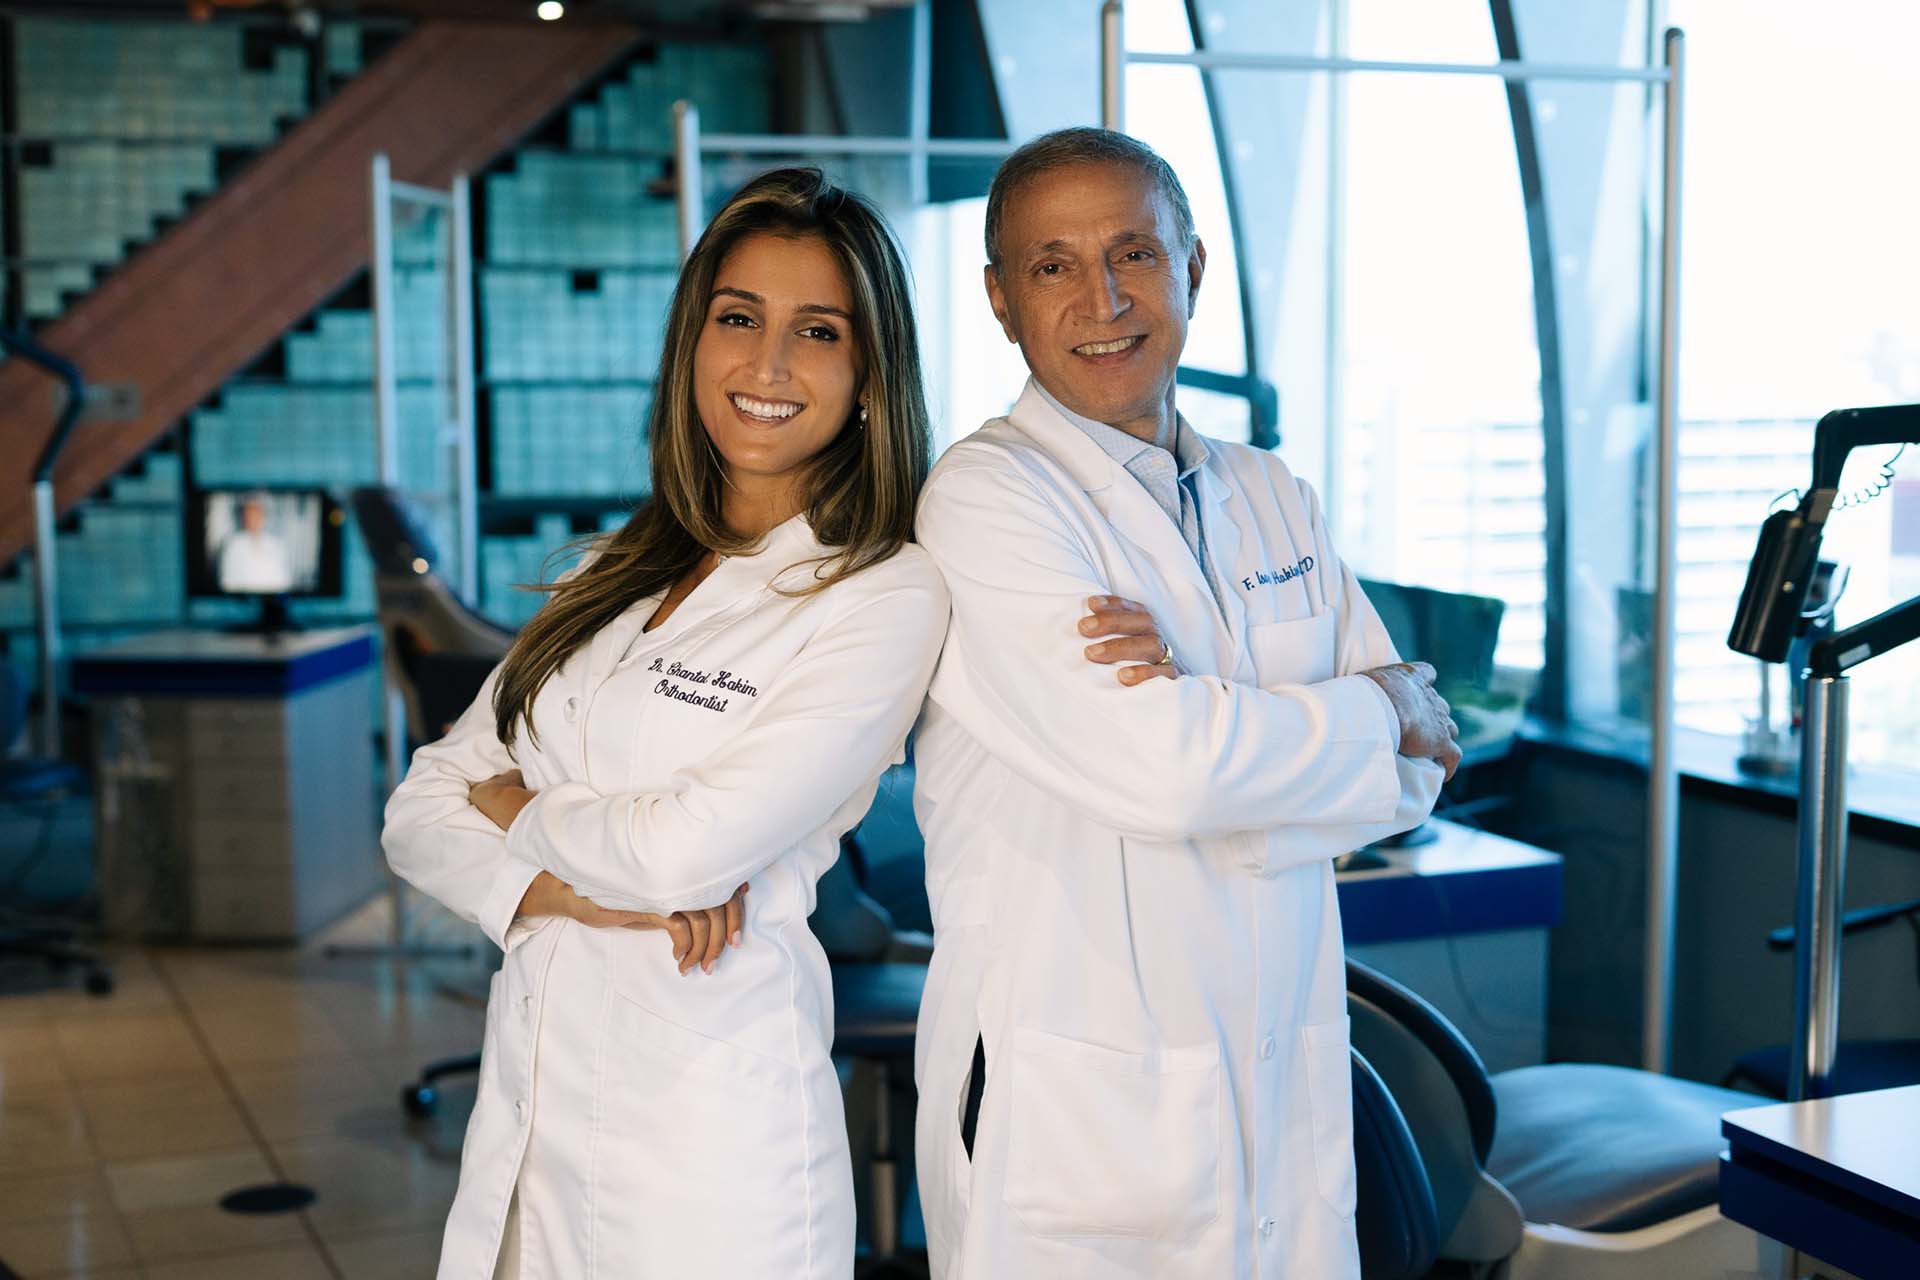 Dr. Chantal Hakim and Dr. F. Isaac Hakim at the Orthospaceship in Los Angeles, a Southern California orthodontic practice serving La Brea, Los Angeles.